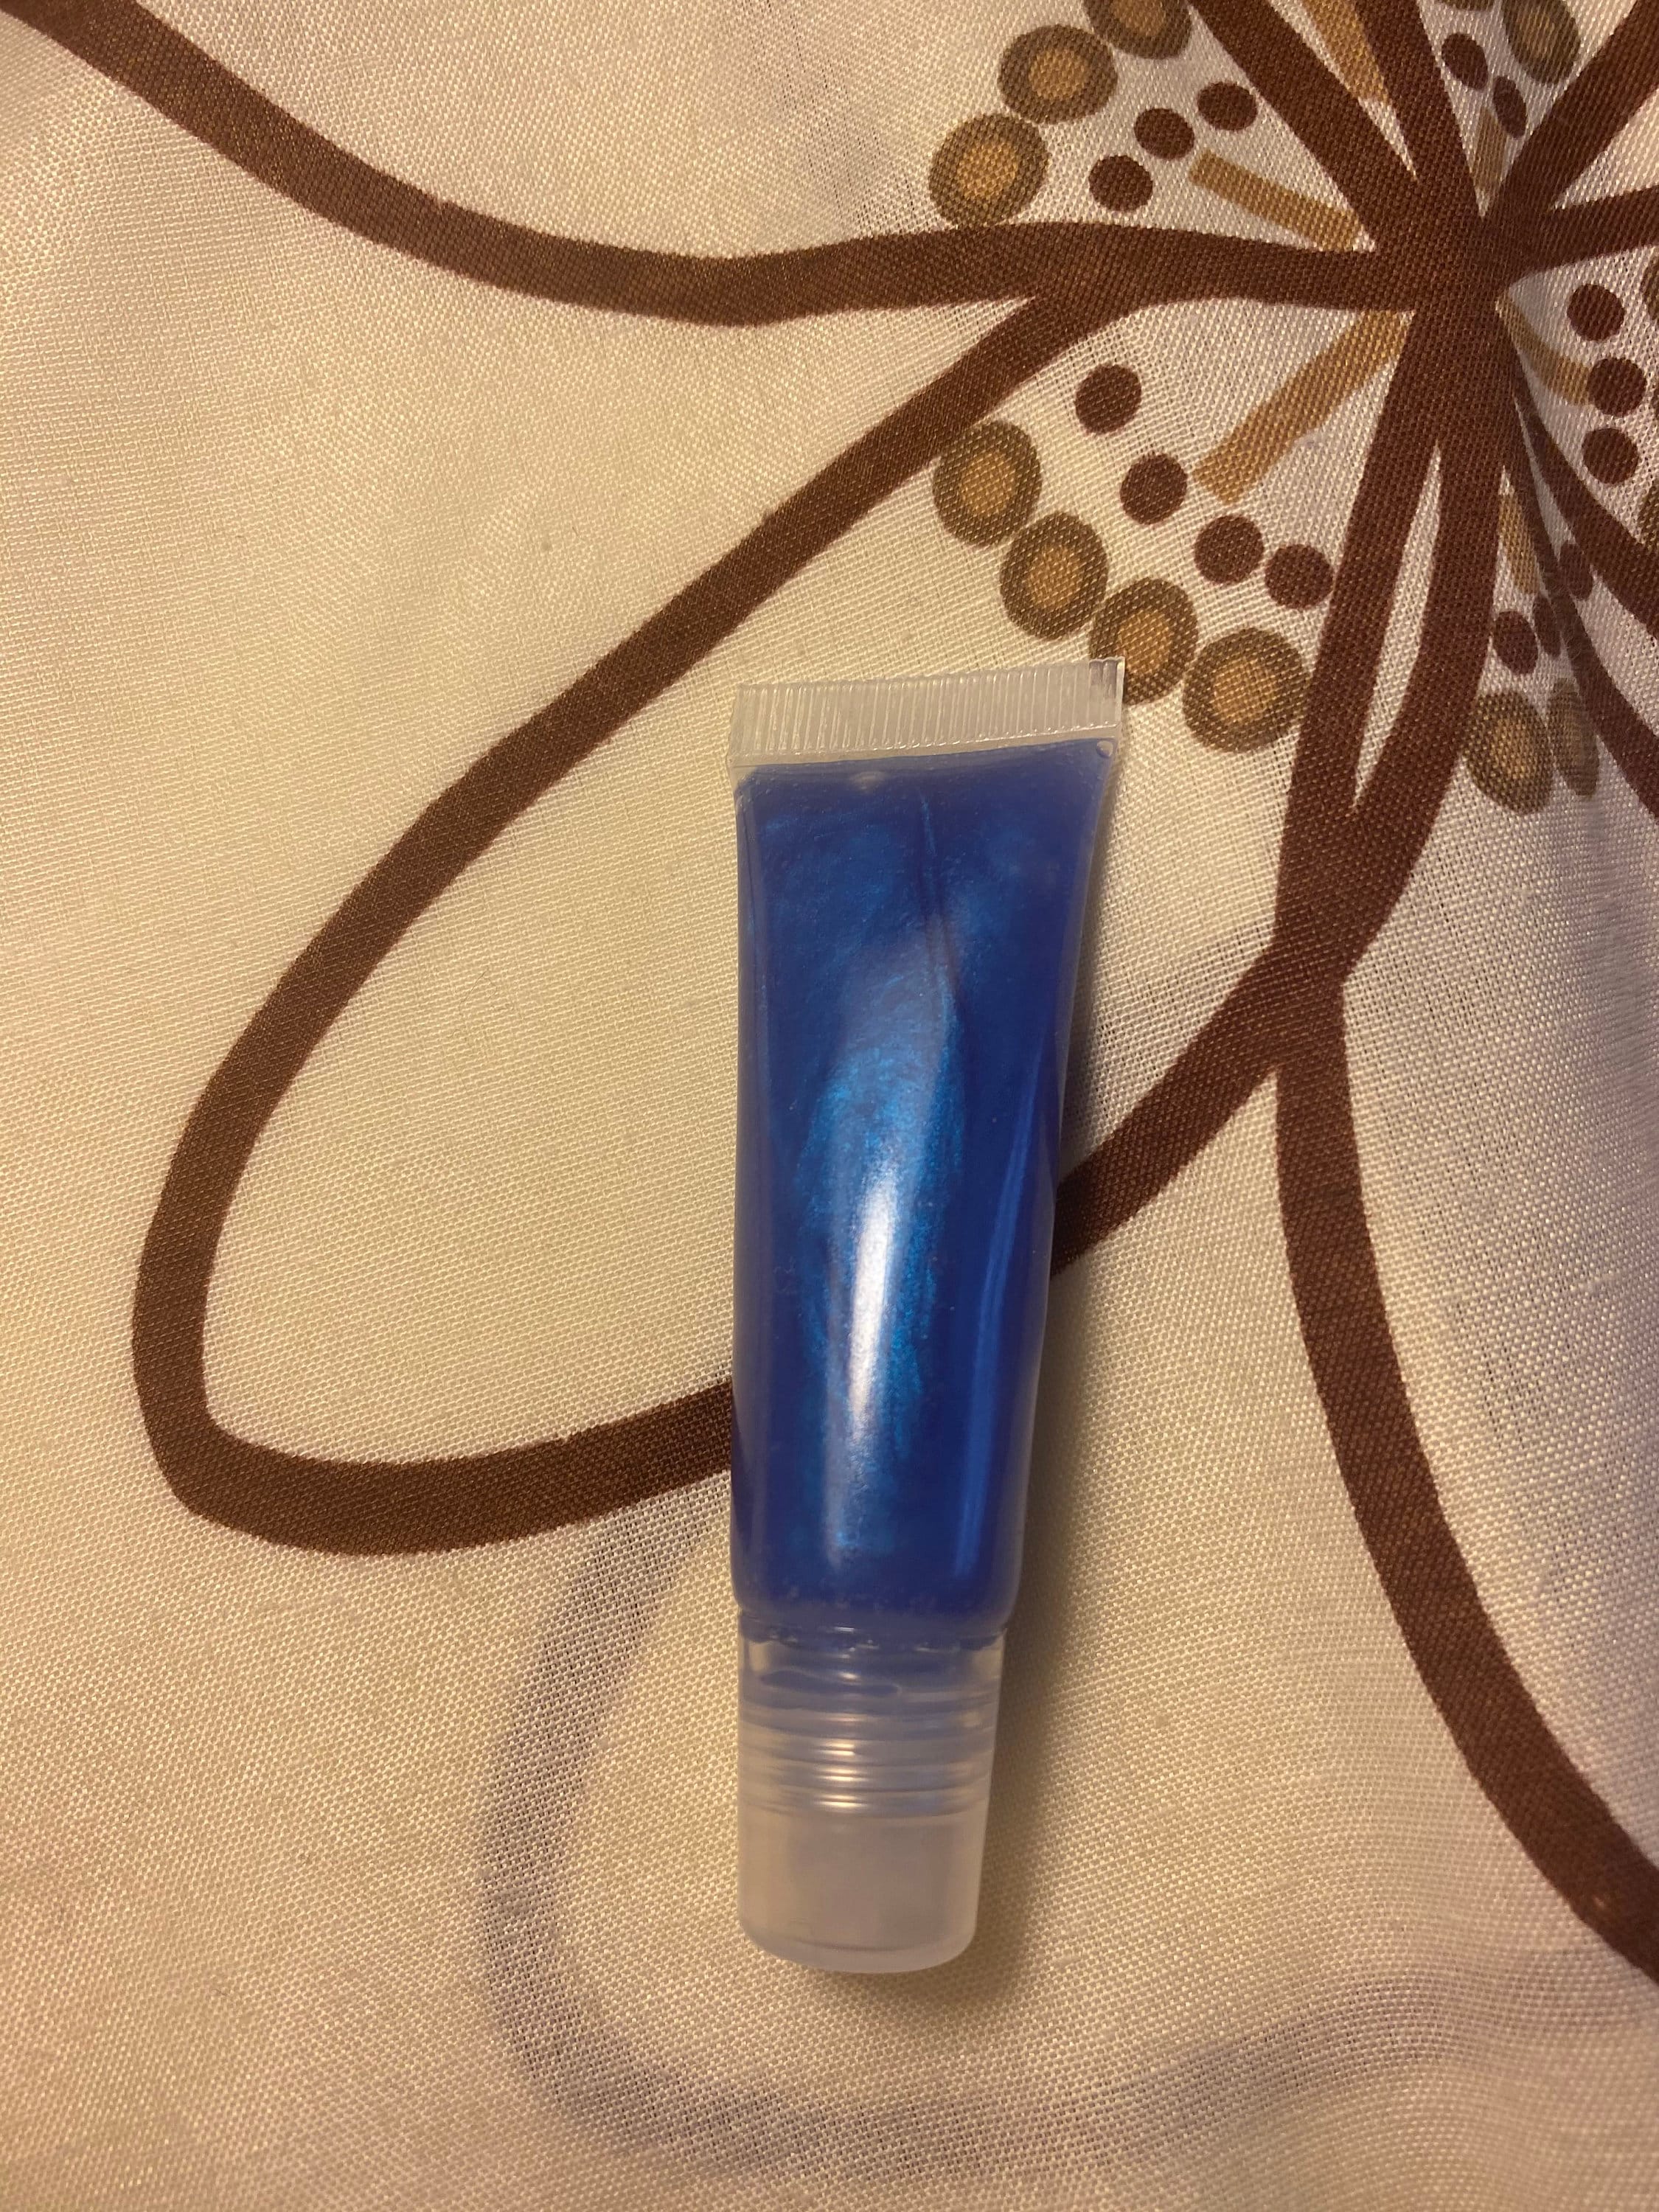 Bright Dark Blue Lip Gloss With Very Strong Pigment. Smells Just